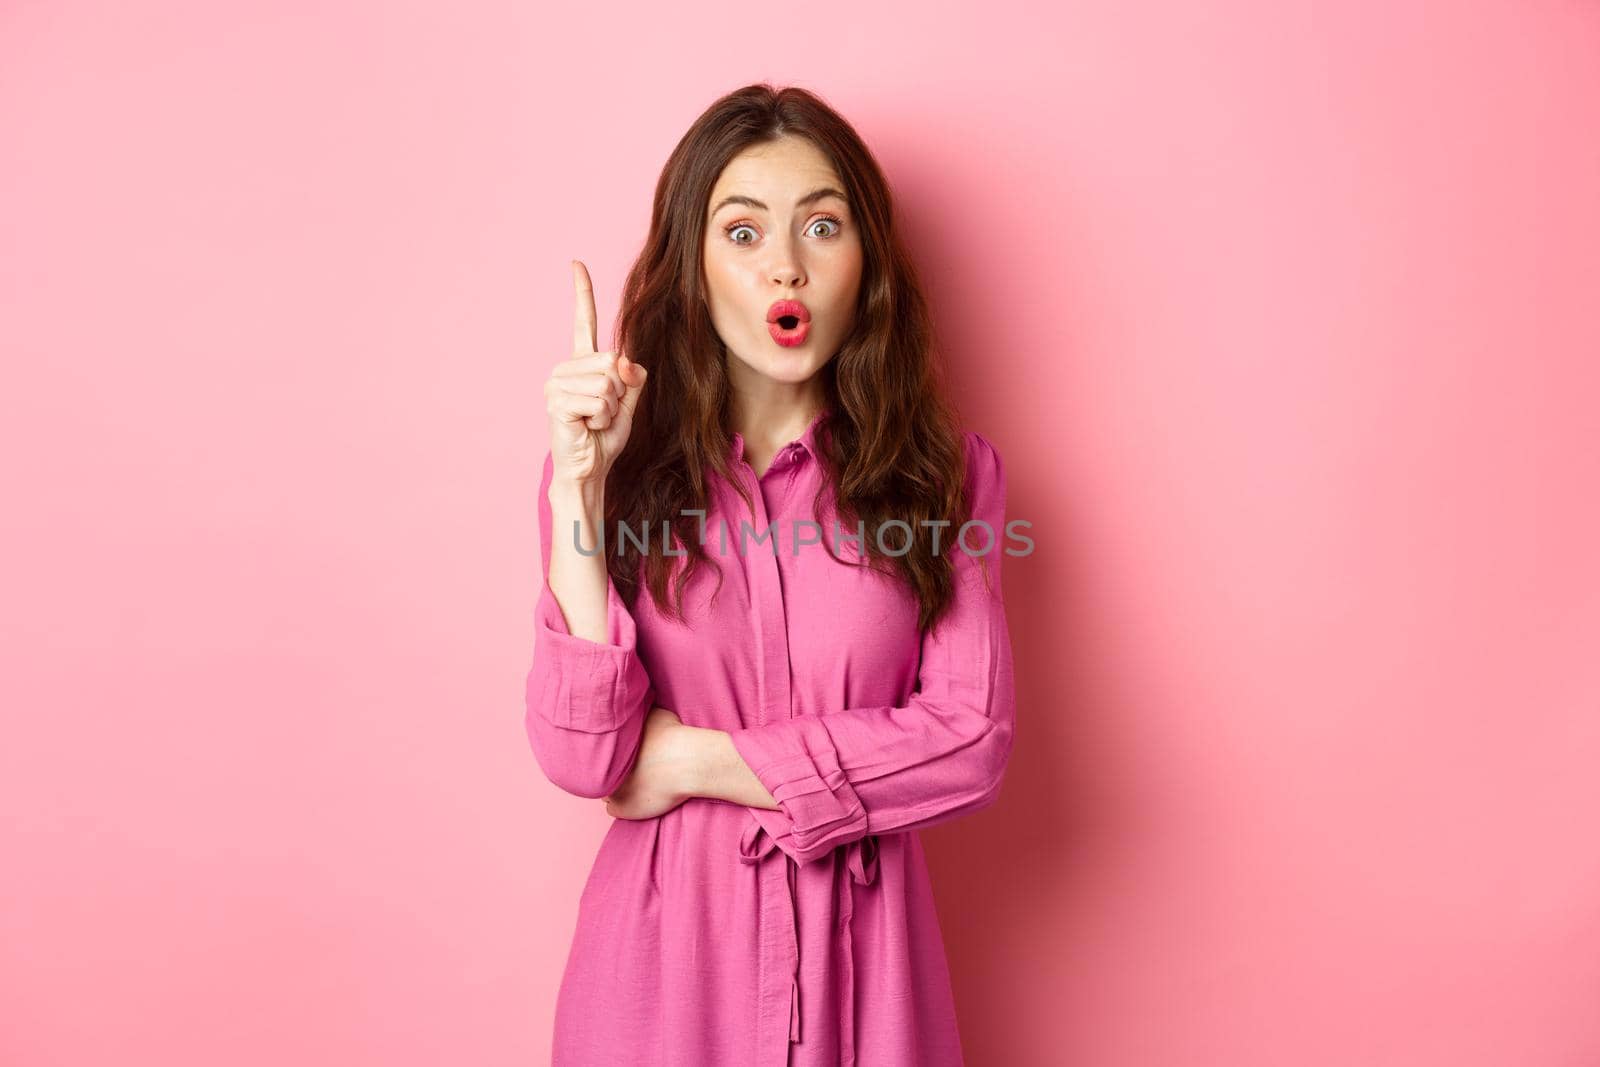 Young stylish feminine girl saying suggestion, have solution, got an idea, raising finger up in eureka sign, standing over pink background.